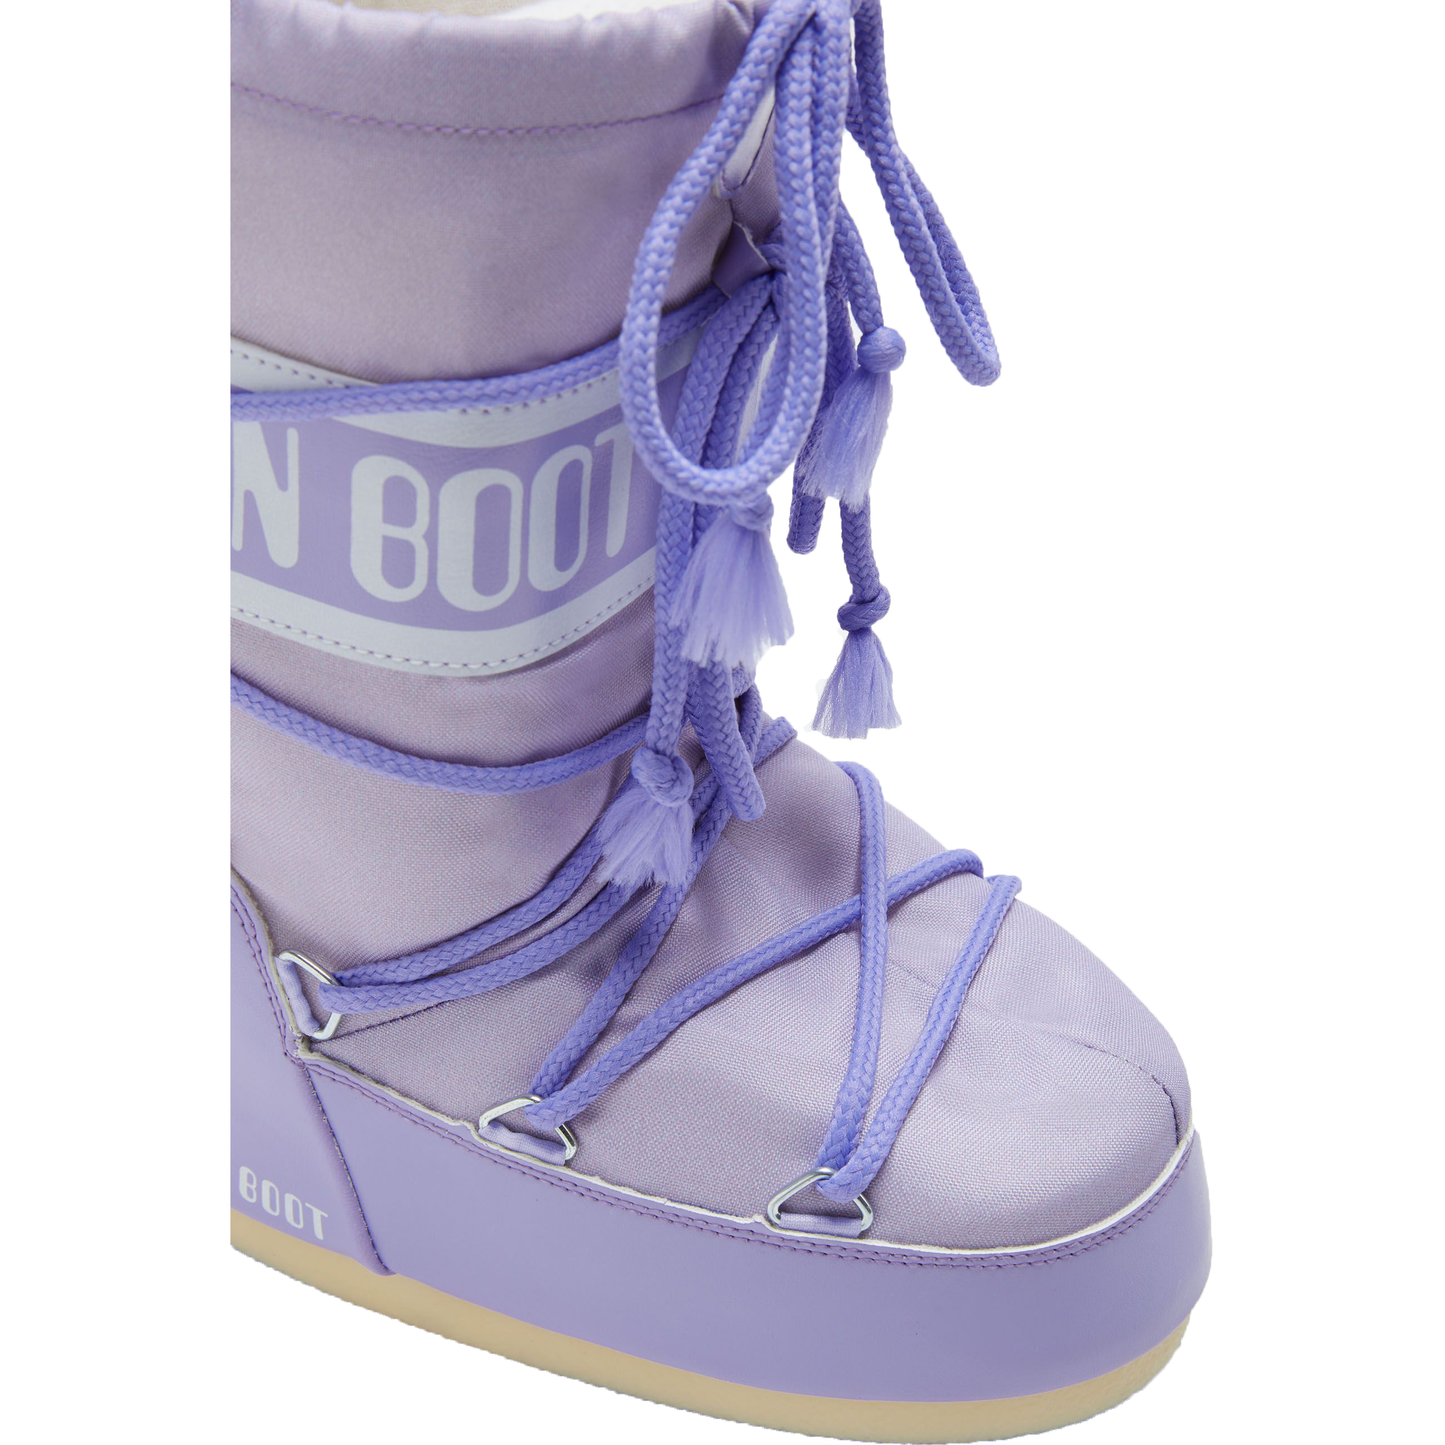 Moon Boot Consignment K Boots Junior Icon Nylon, Lilac